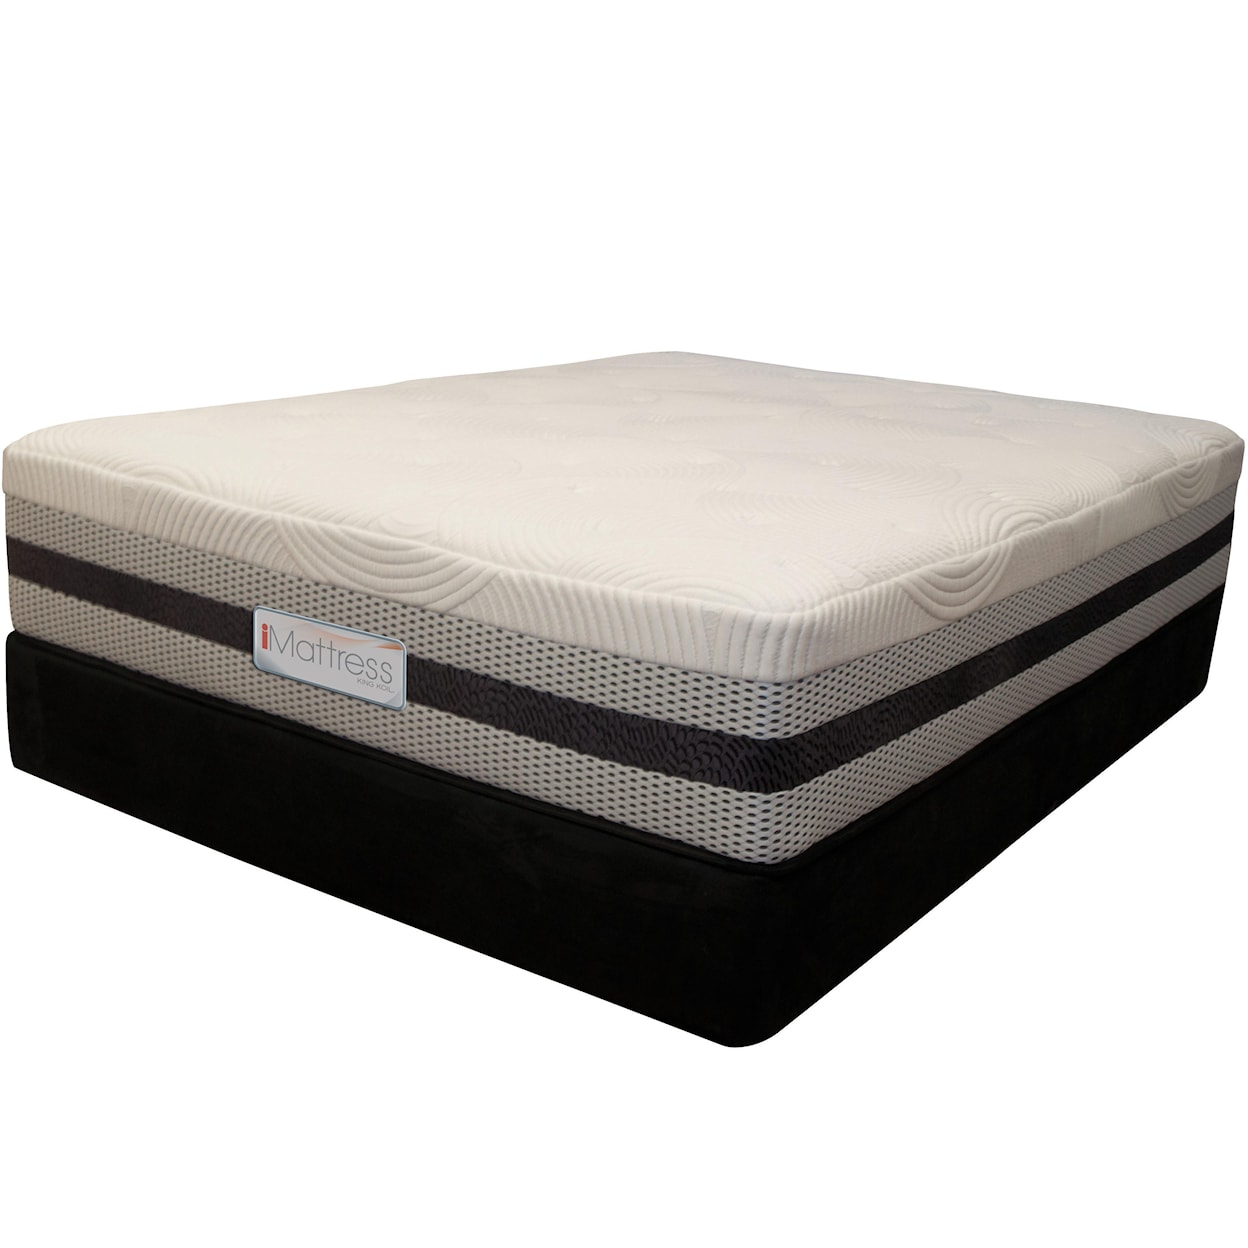 King Koil XS9-14 Twin Pocketed Coil Mattress